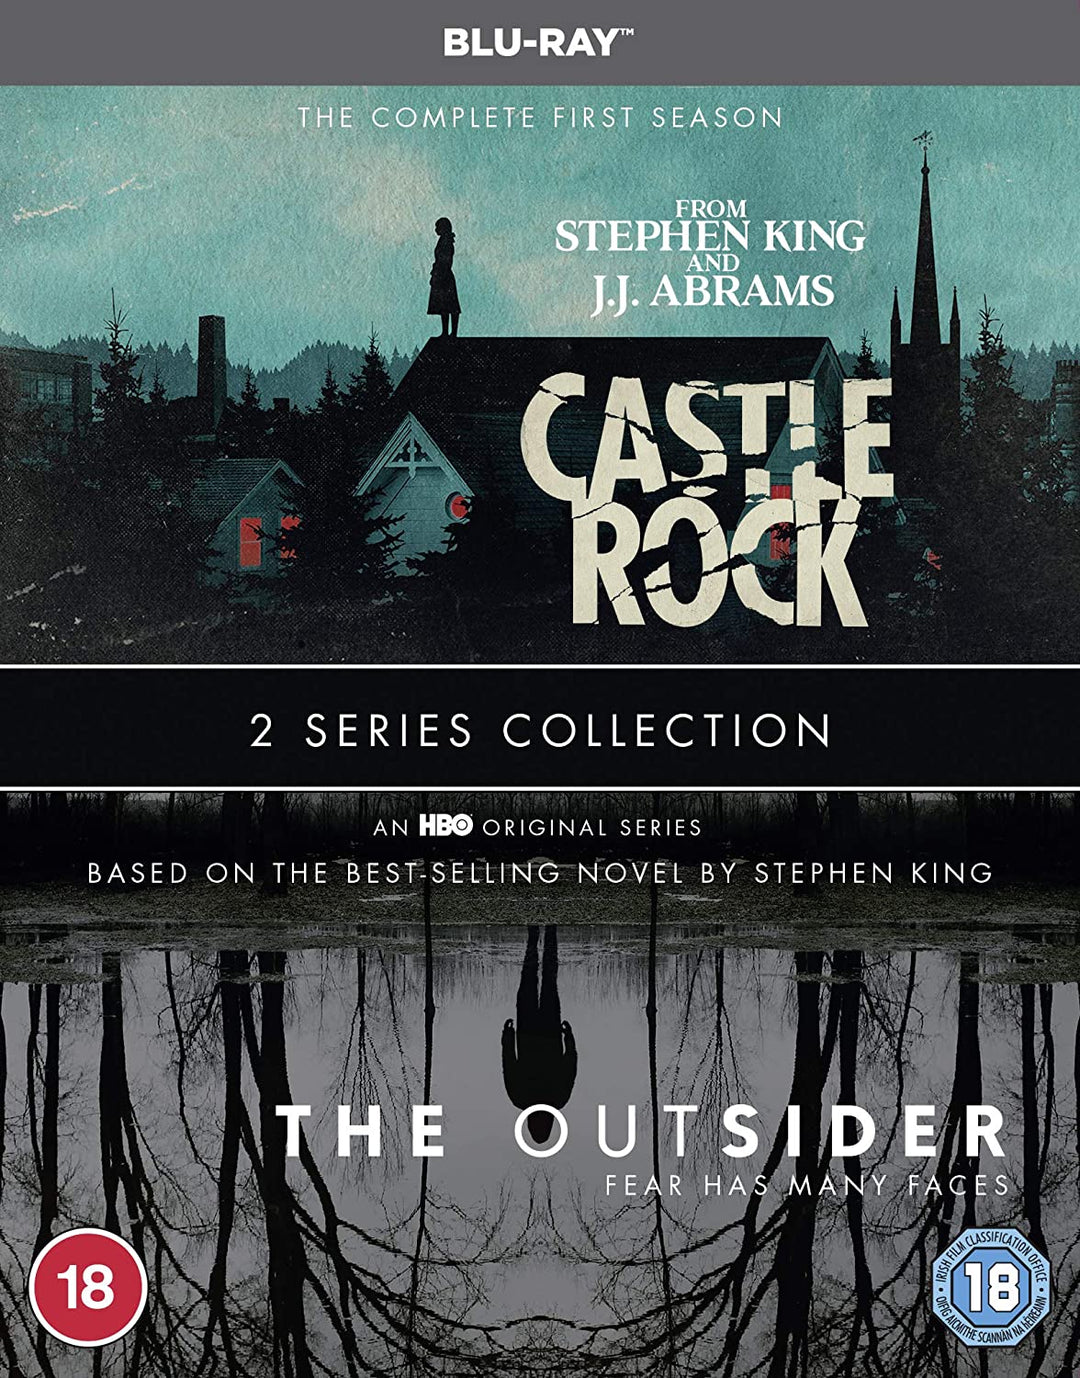 Castle Rock: Season 1 and The Outsider – 2 Series Collection [Mystery] [2020] [Region Free] [Blu-ray]